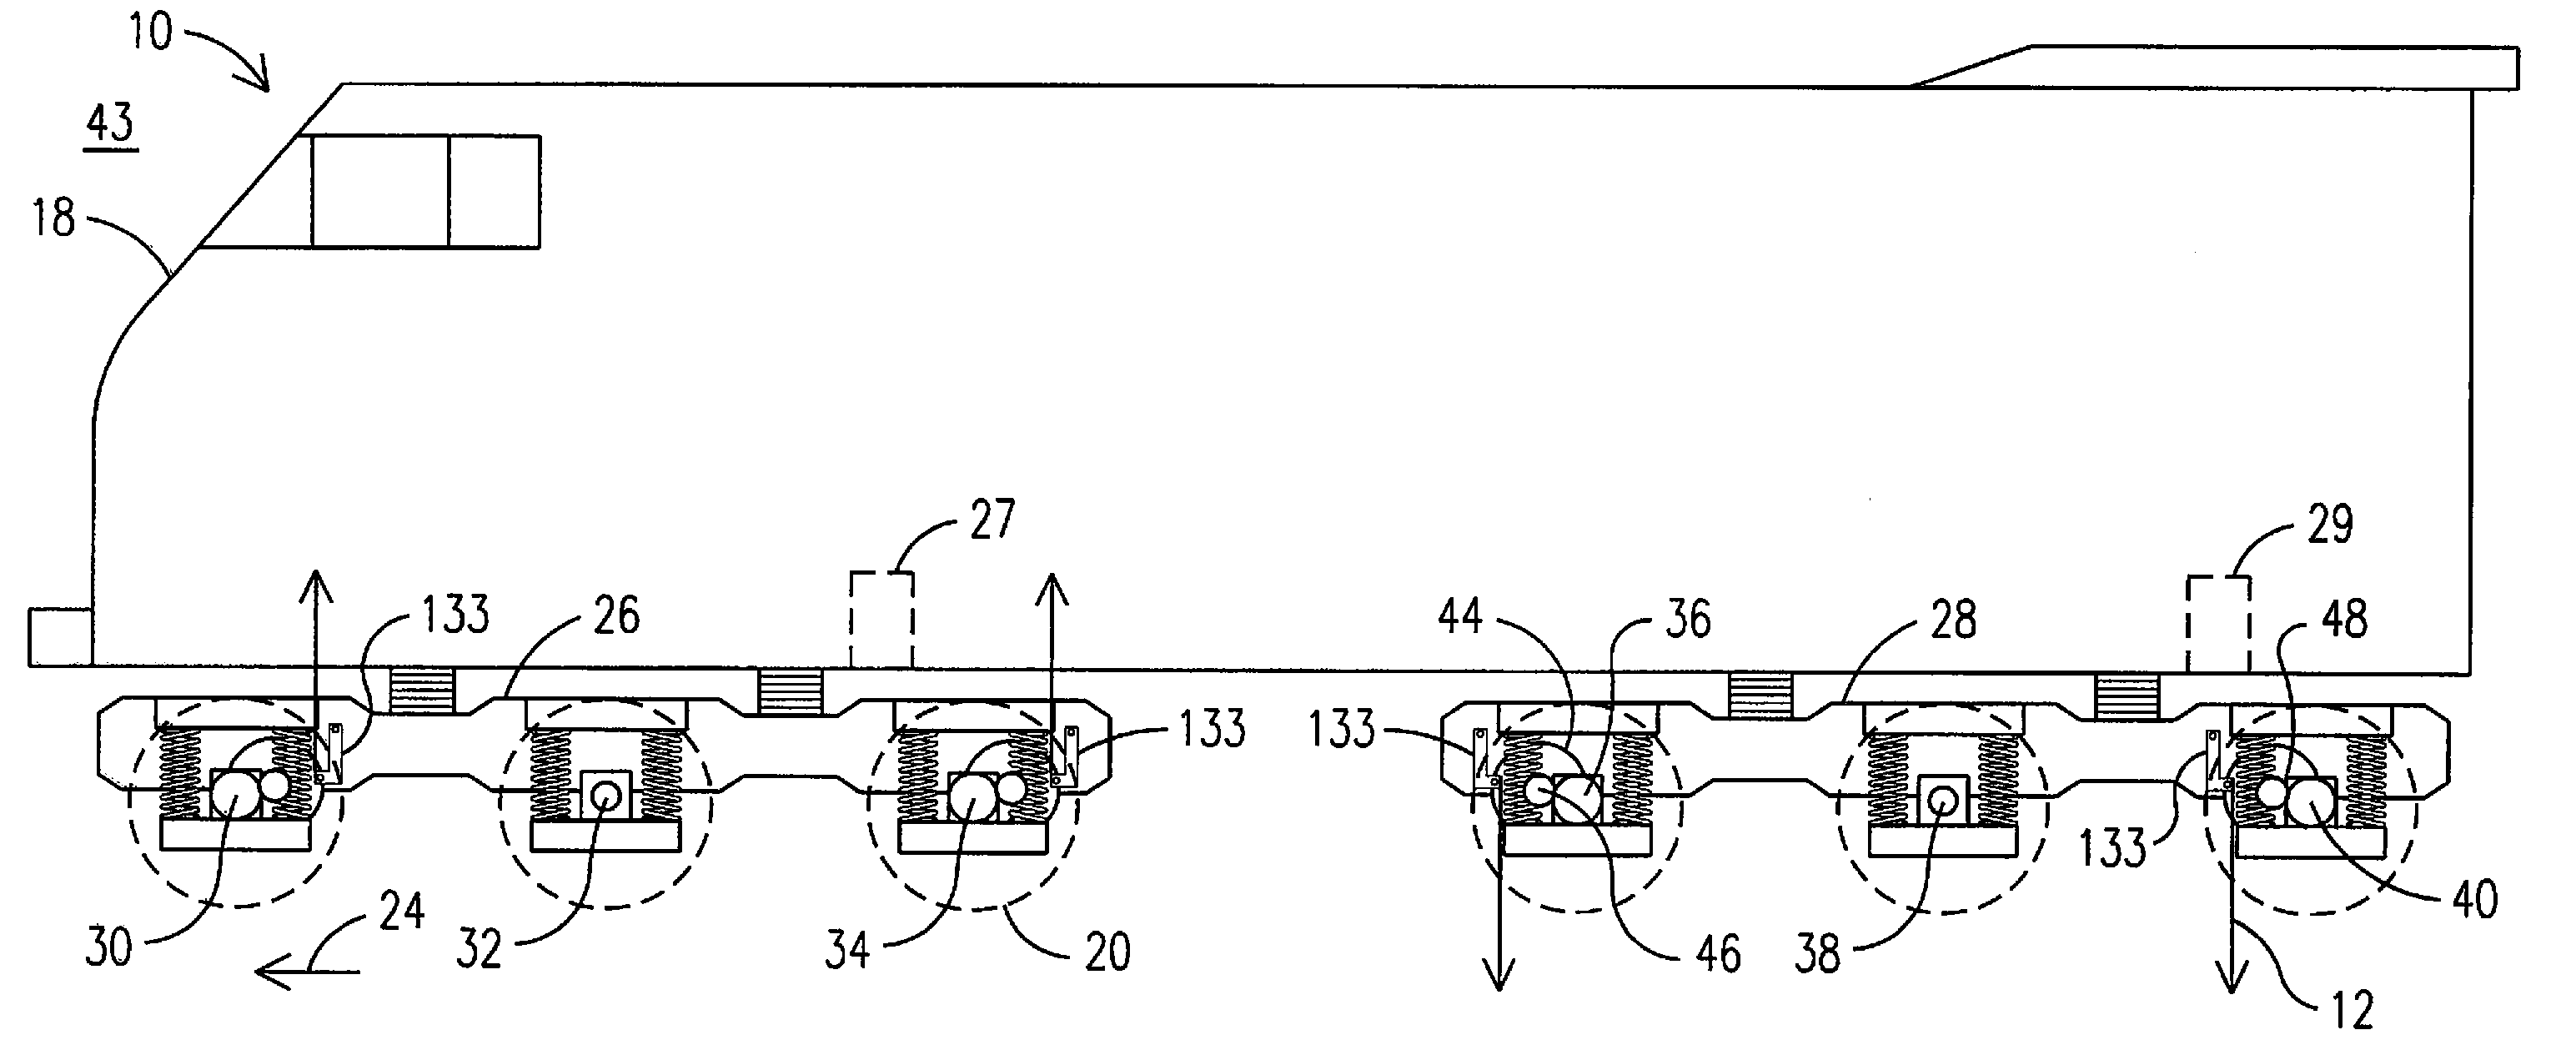 System and method for dynamically coupling two or more axles of a rail vehicle